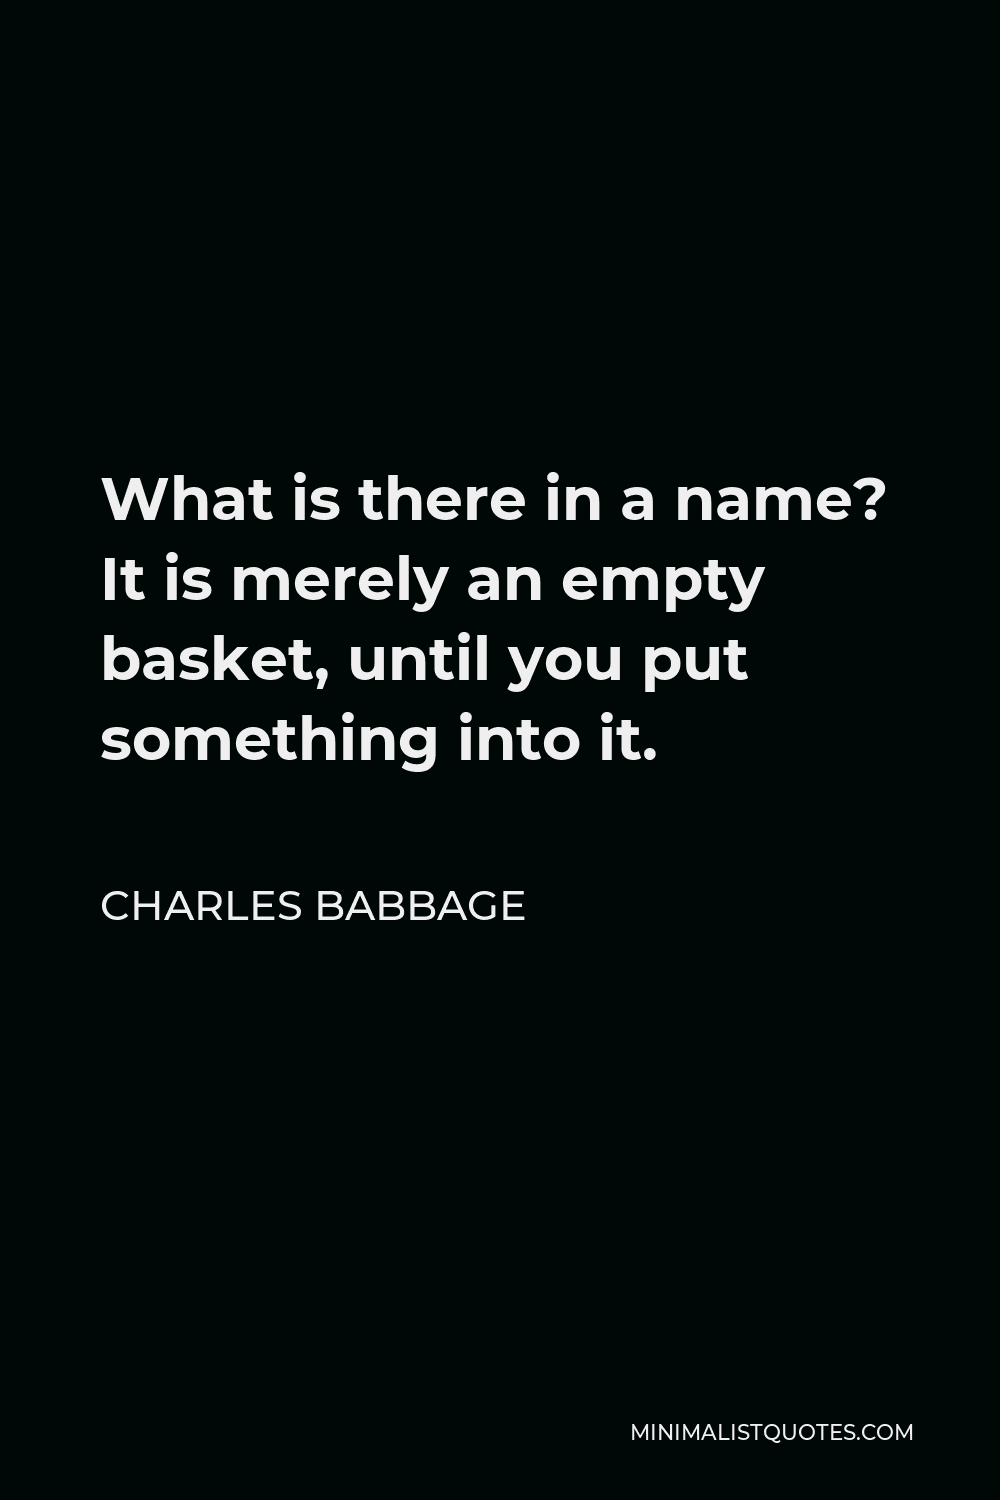 Charles Babbage Quote - What is there in a name? It is merely an empty basket, until you put something into it.